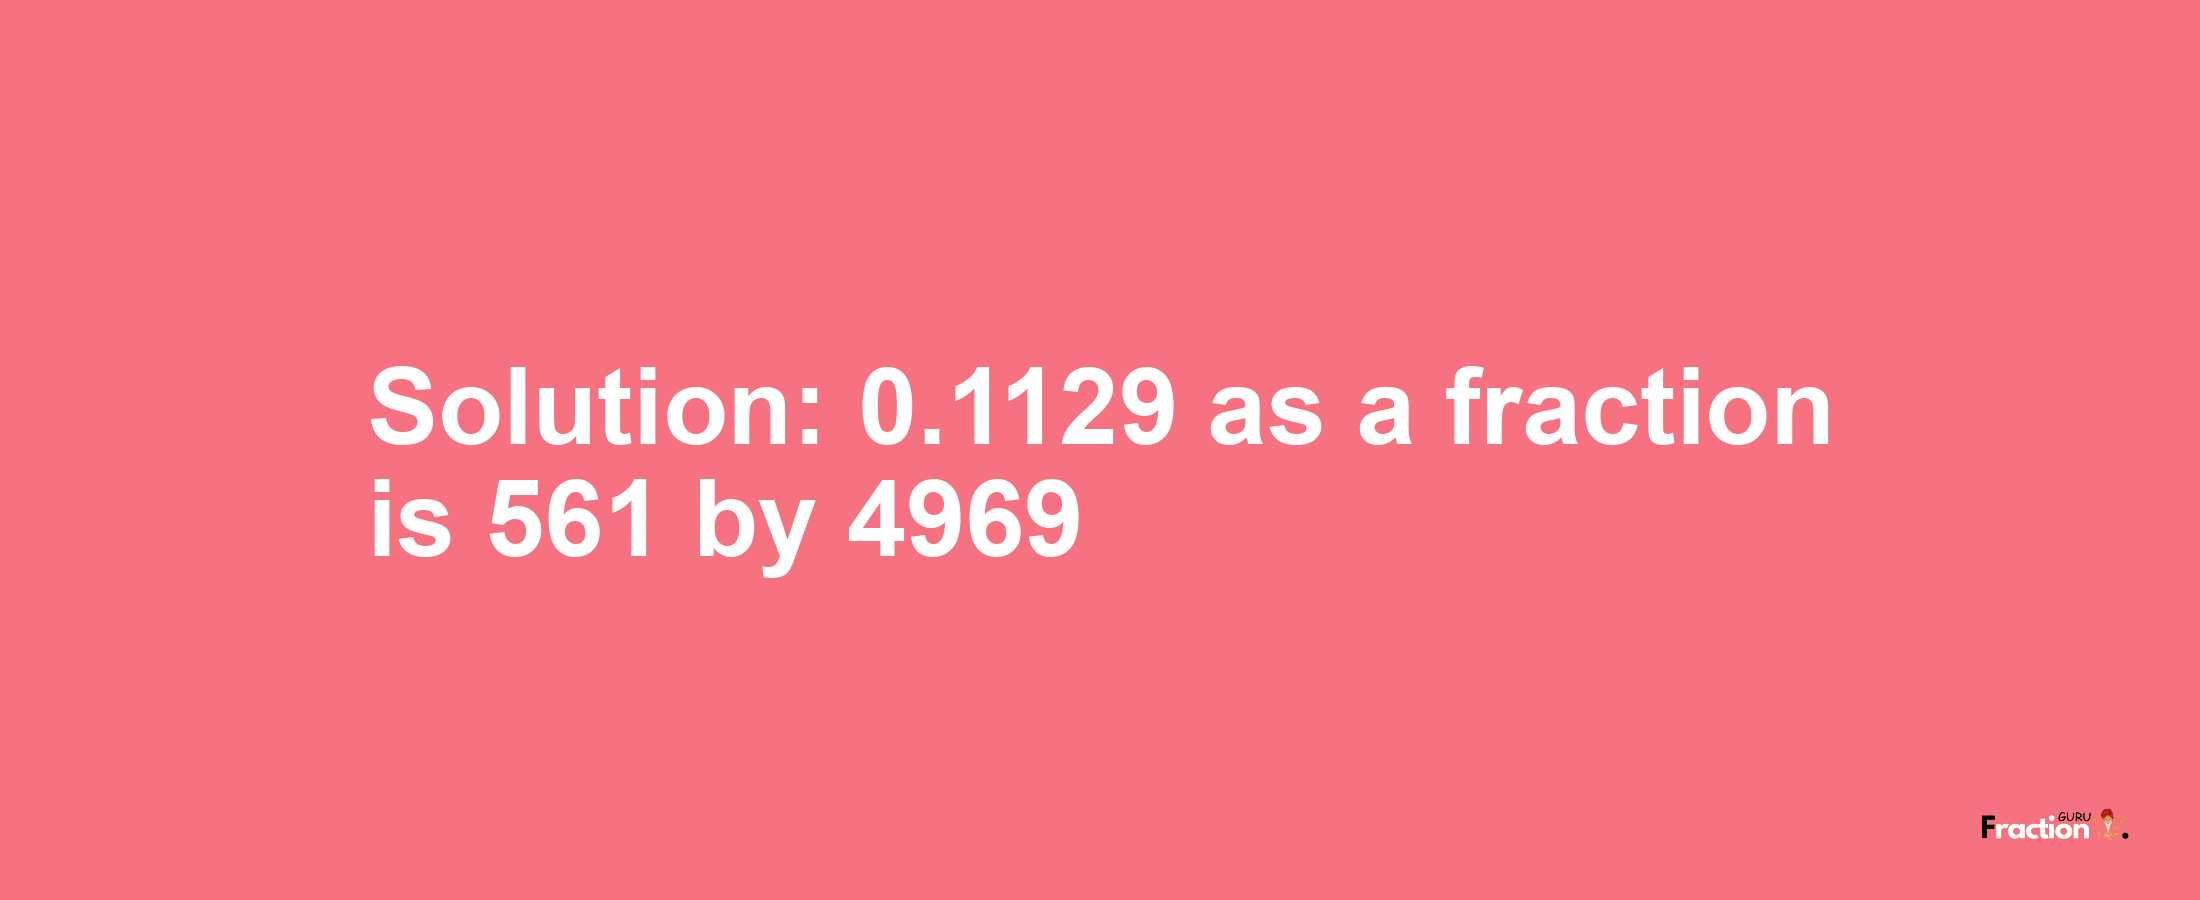 Solution:0.1129 as a fraction is 561/4969